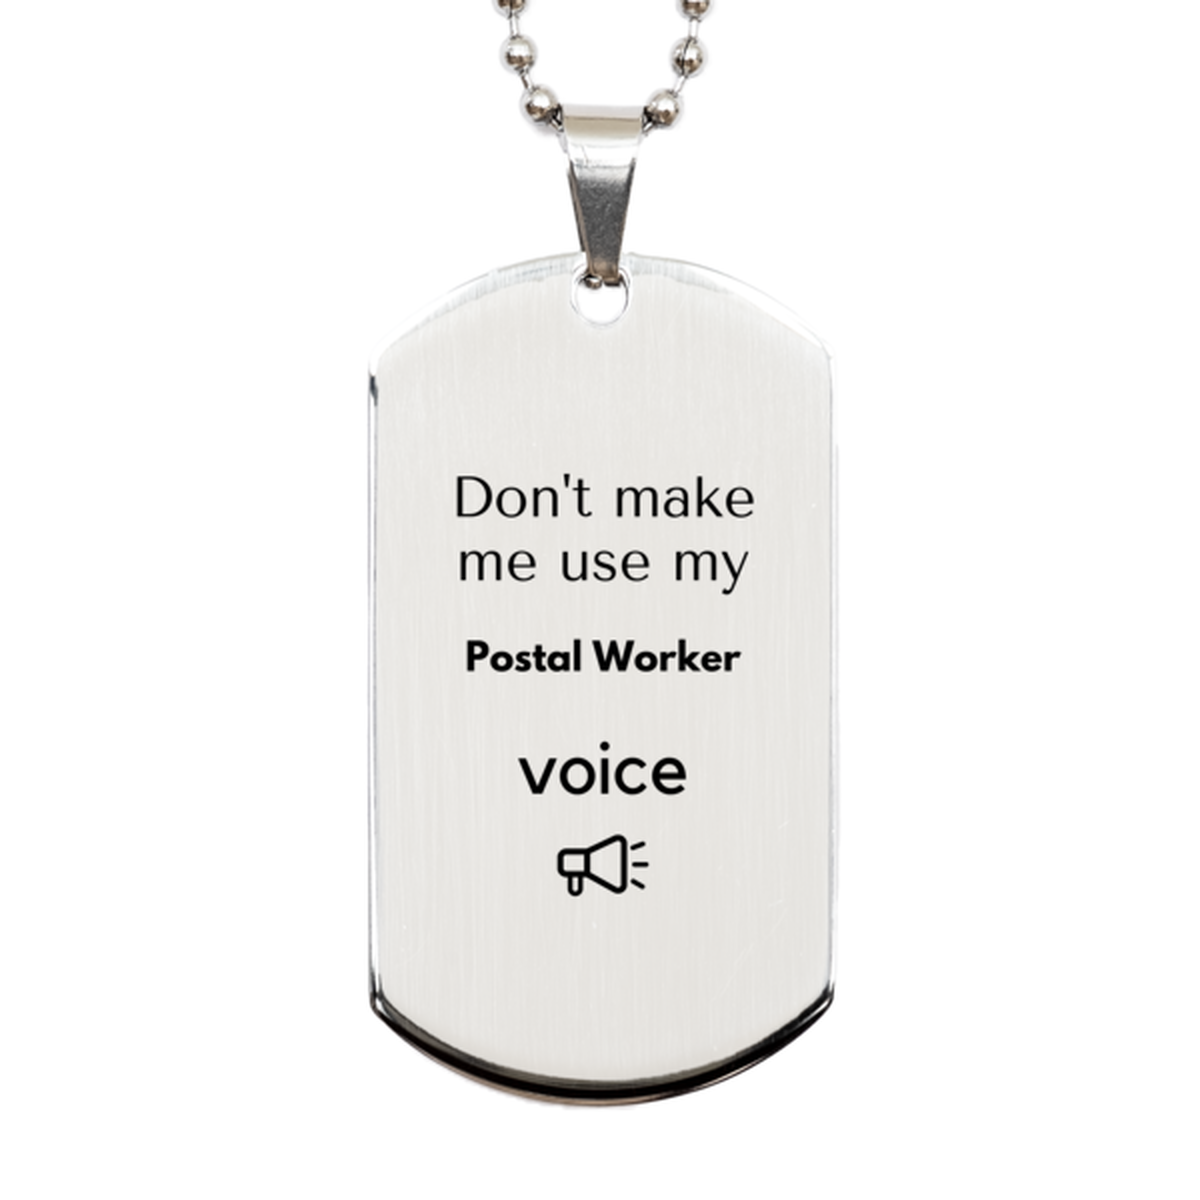 Don't make me use my Postal Worker voice, Sarcasm Postal Worker Gifts, Christmas Postal Worker Silver Dog Tag Birthday Unique Gifts For Postal Worker Coworkers, Men, Women, Colleague, Friends